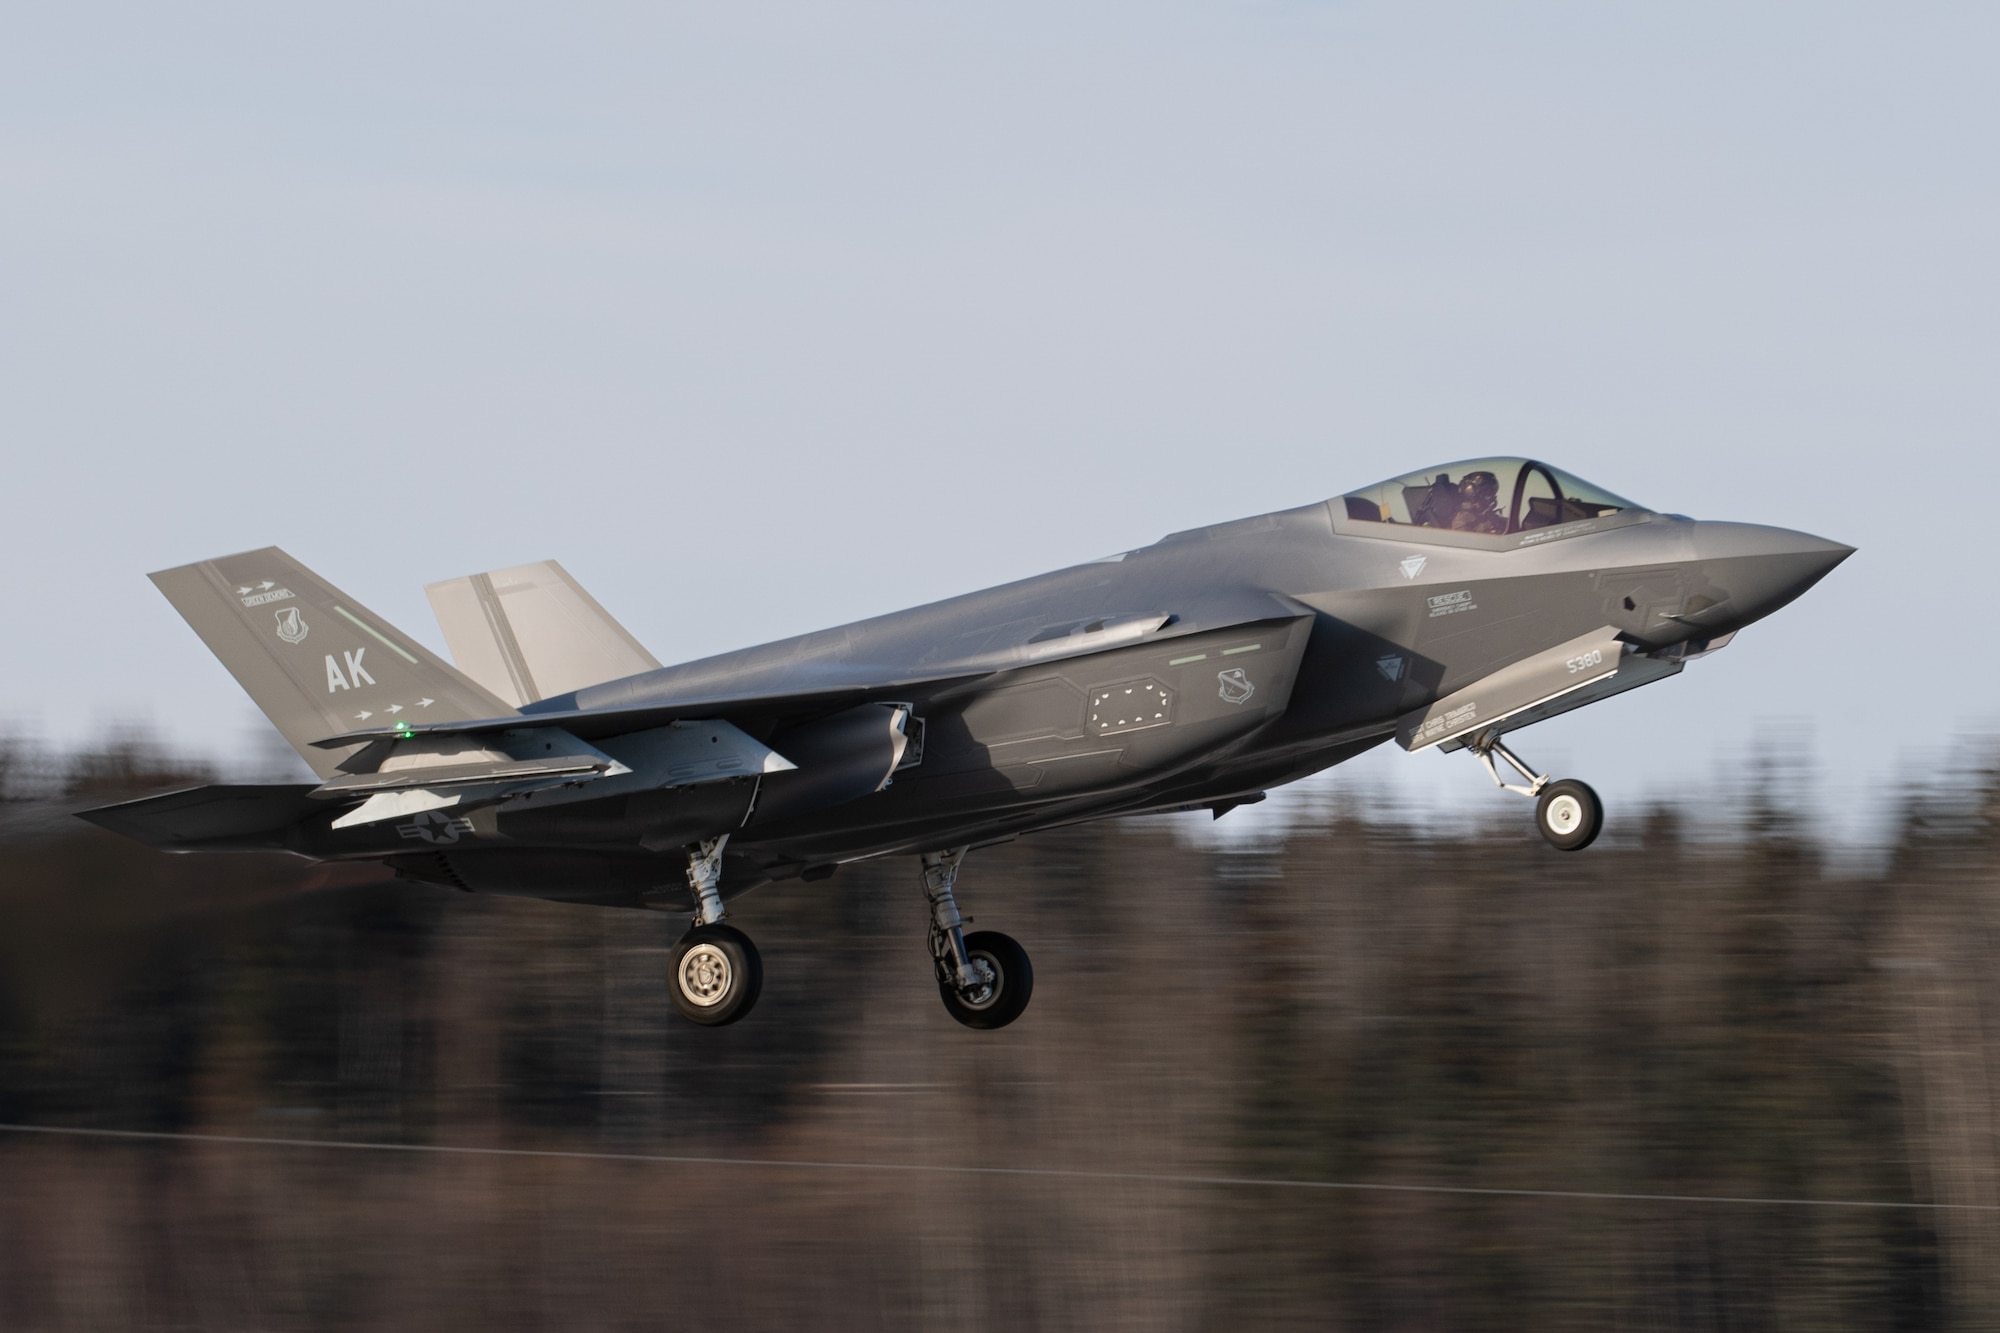 A U.S. Air Force F-35 Lightning II assigned to the 356th Fighter Squadron takes off from Eielson Air Force Base, Alaska during exercise Arctic Gold 23-2, April 19, 2023. Arctic Gold 23-2 tested the wing’s ability to sustain F-35 operations from multiple, simulated, deployed locations. (U.S. Air Force photo by Airman 1st Class Ricardo Sandoval)